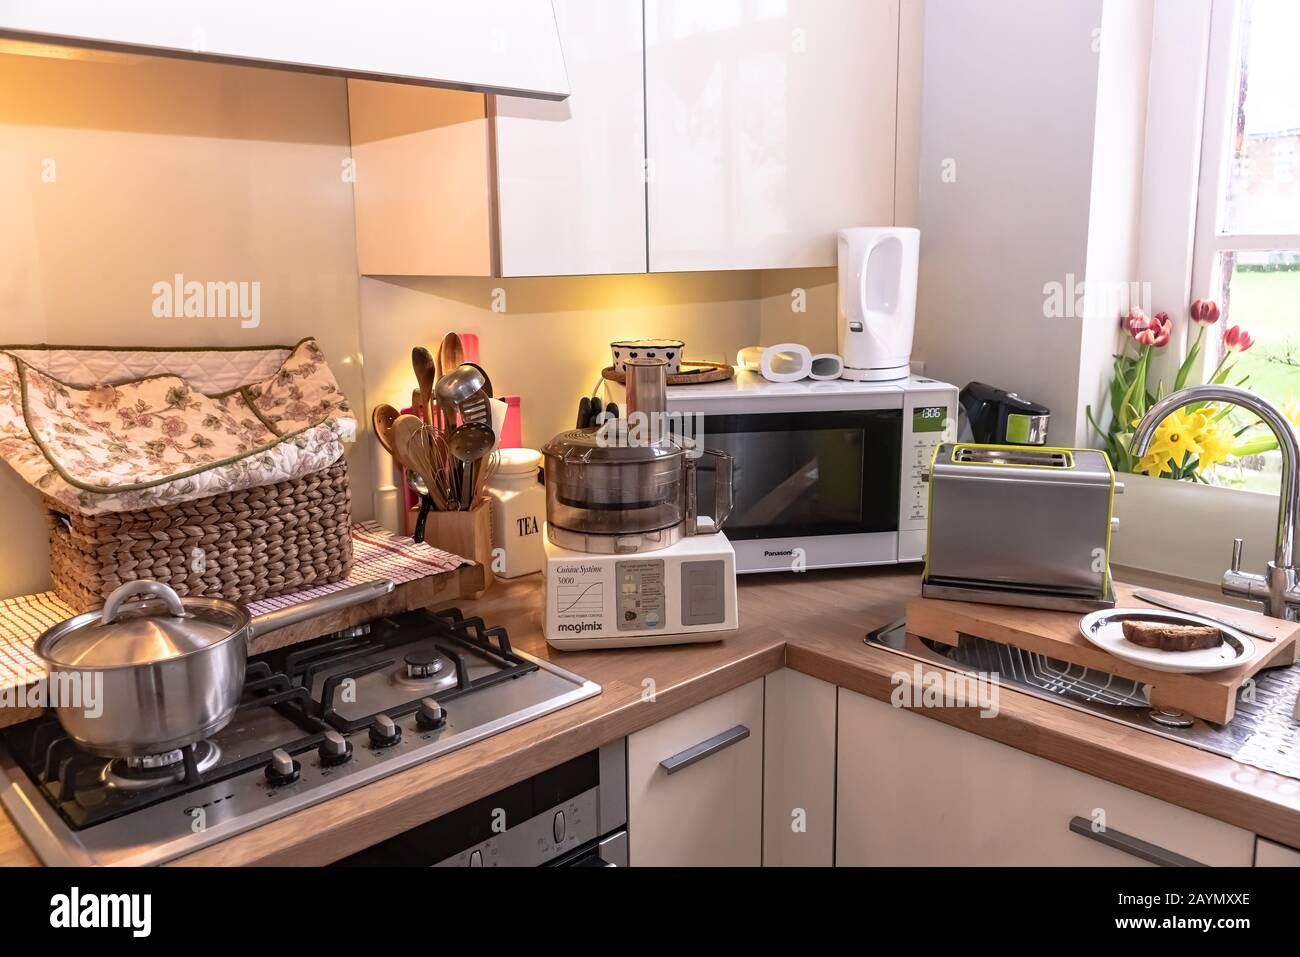 Cooking in a small kitchen - showing the economical use of space to cook homemade food, alongside its hazards. Stock Photo